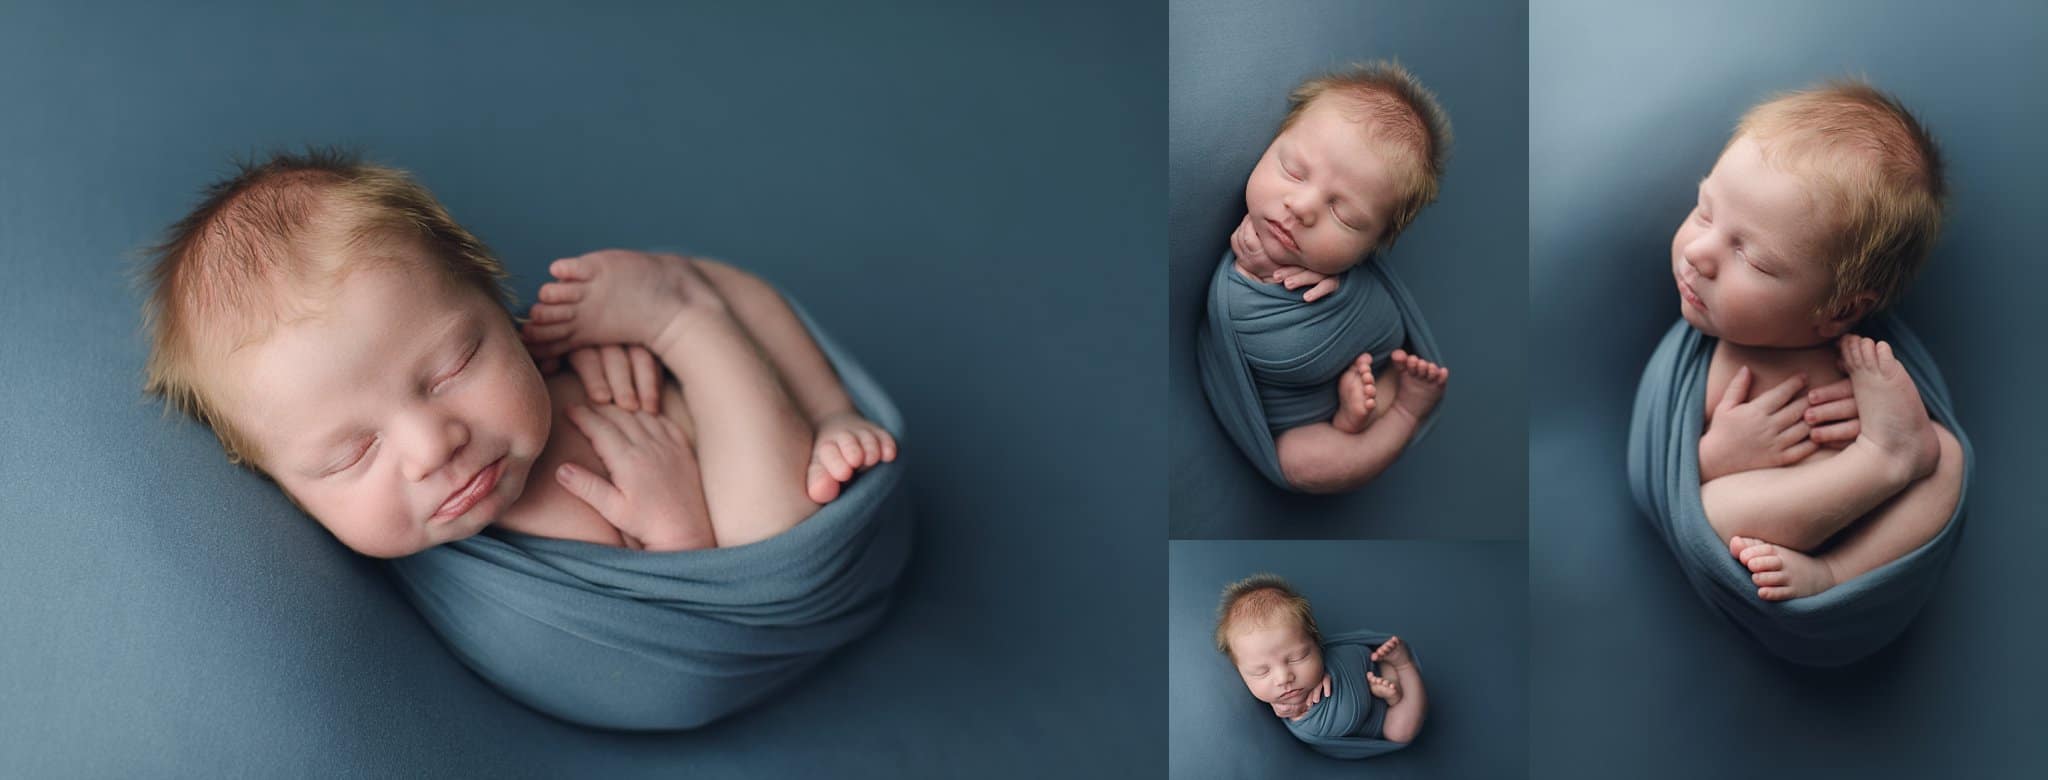 St Johns County Newborn Photographer baby boy with fuzzy hair swaddled in teal